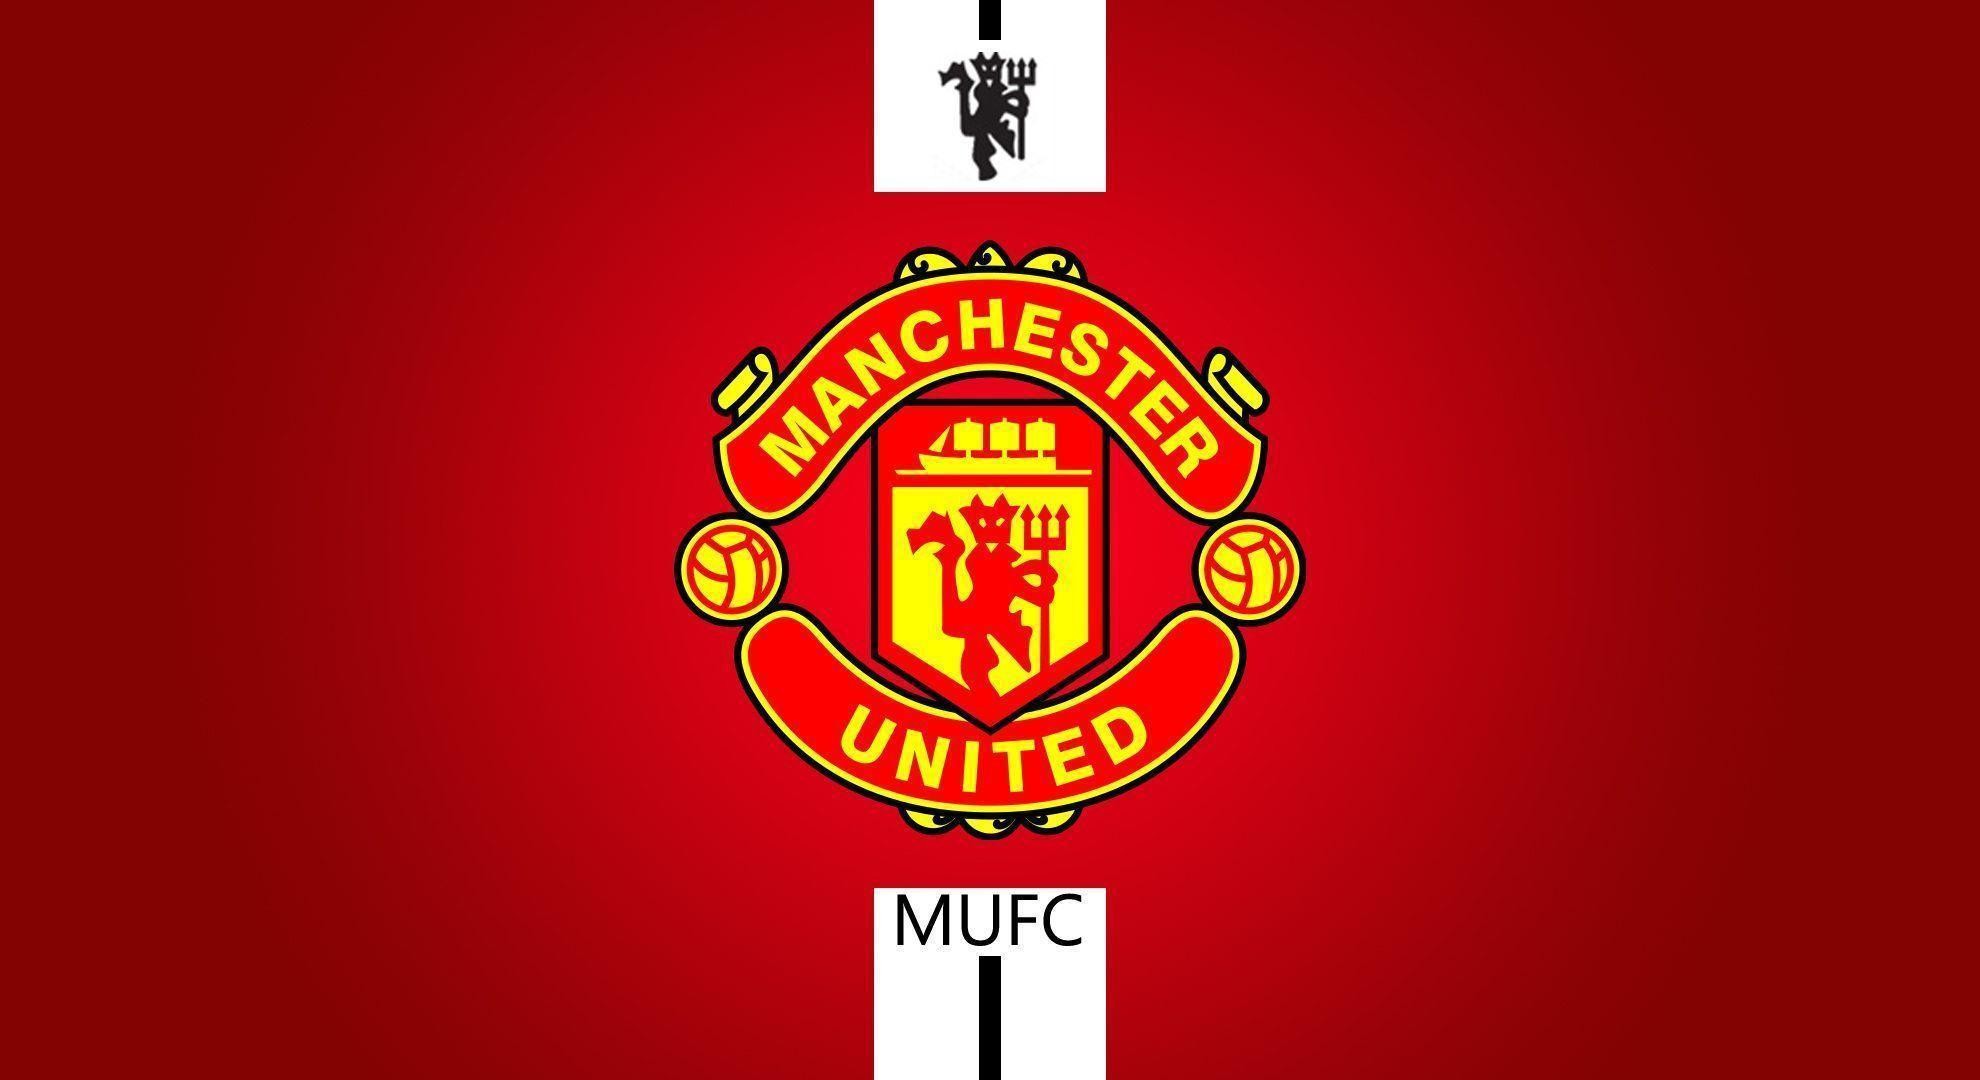 1980x1080 Manchester United Logo Wallpapers Quot Gt Download 1920x1080 Manchester 1980x1080